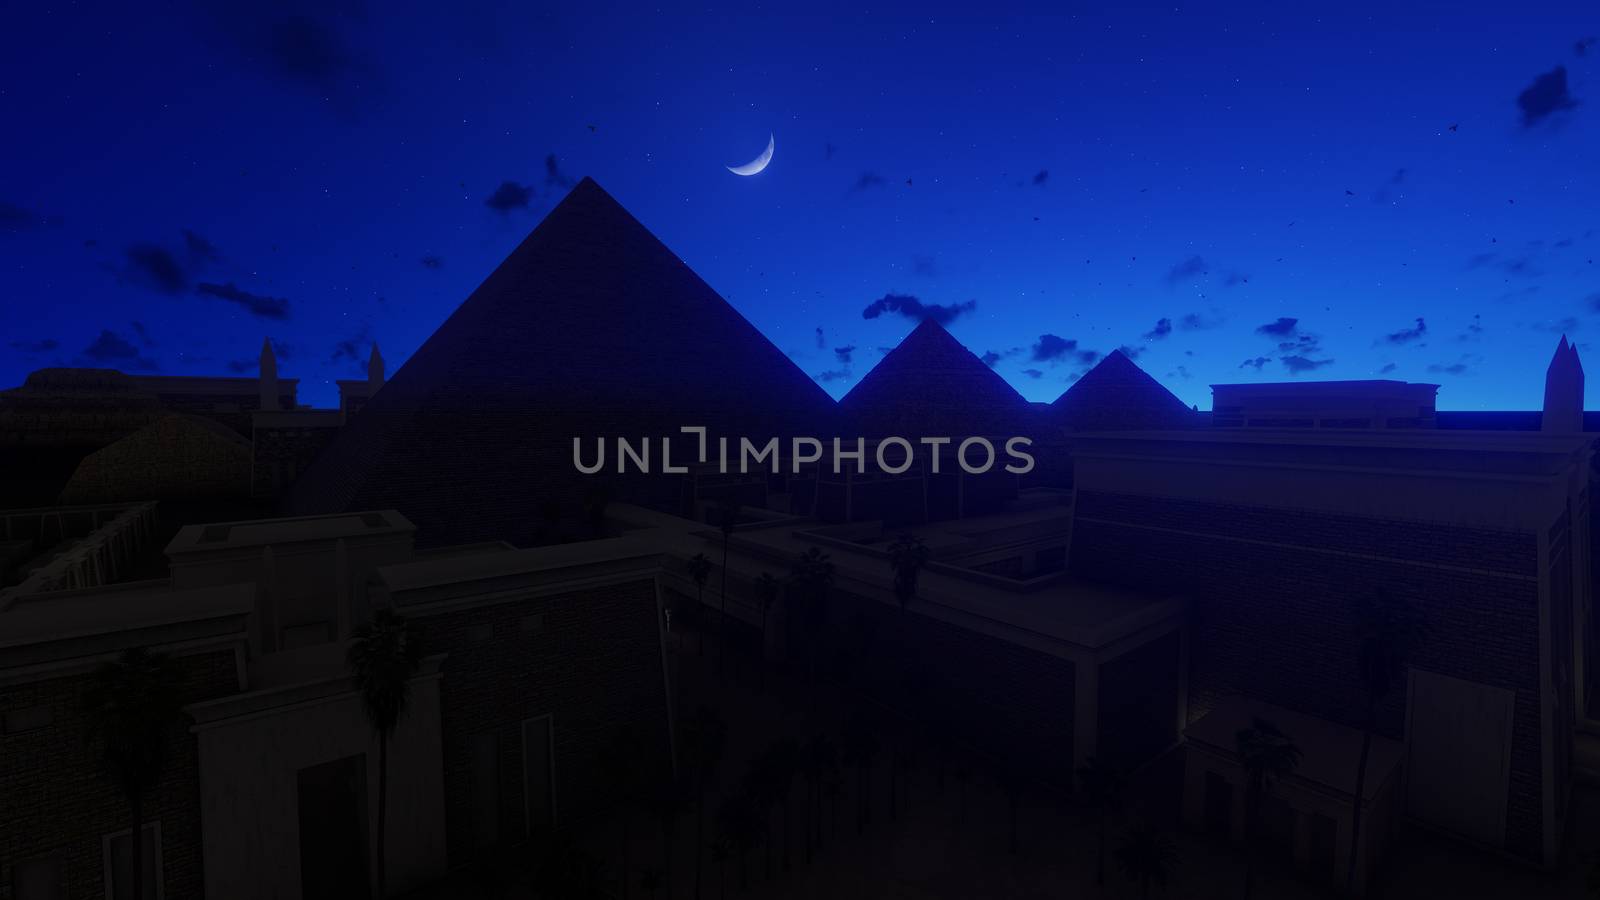 The Great Pyramids at Giza against starry sky, Cairo Egypt by pixelfootage